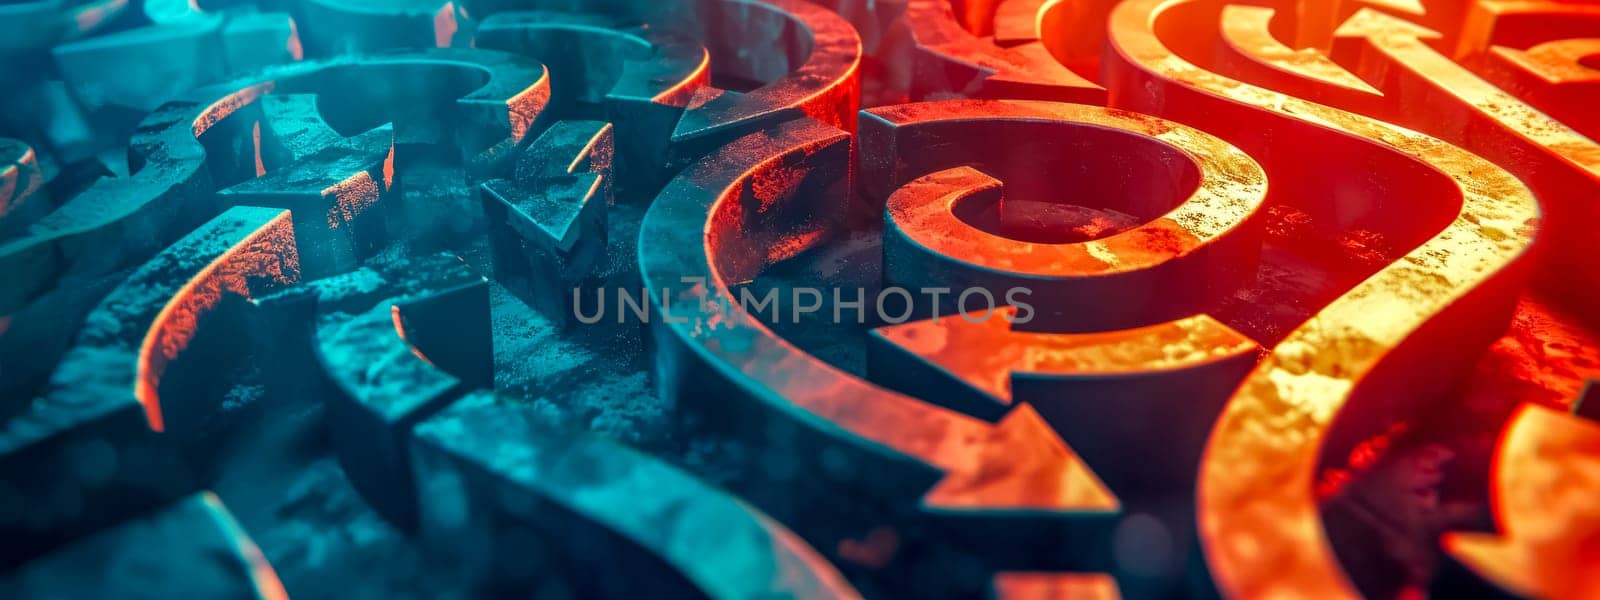 labyrinth of glowing arrows in red and blue tones, symbolizing choices, directions, and the complex journey of decision-making by Edophoto